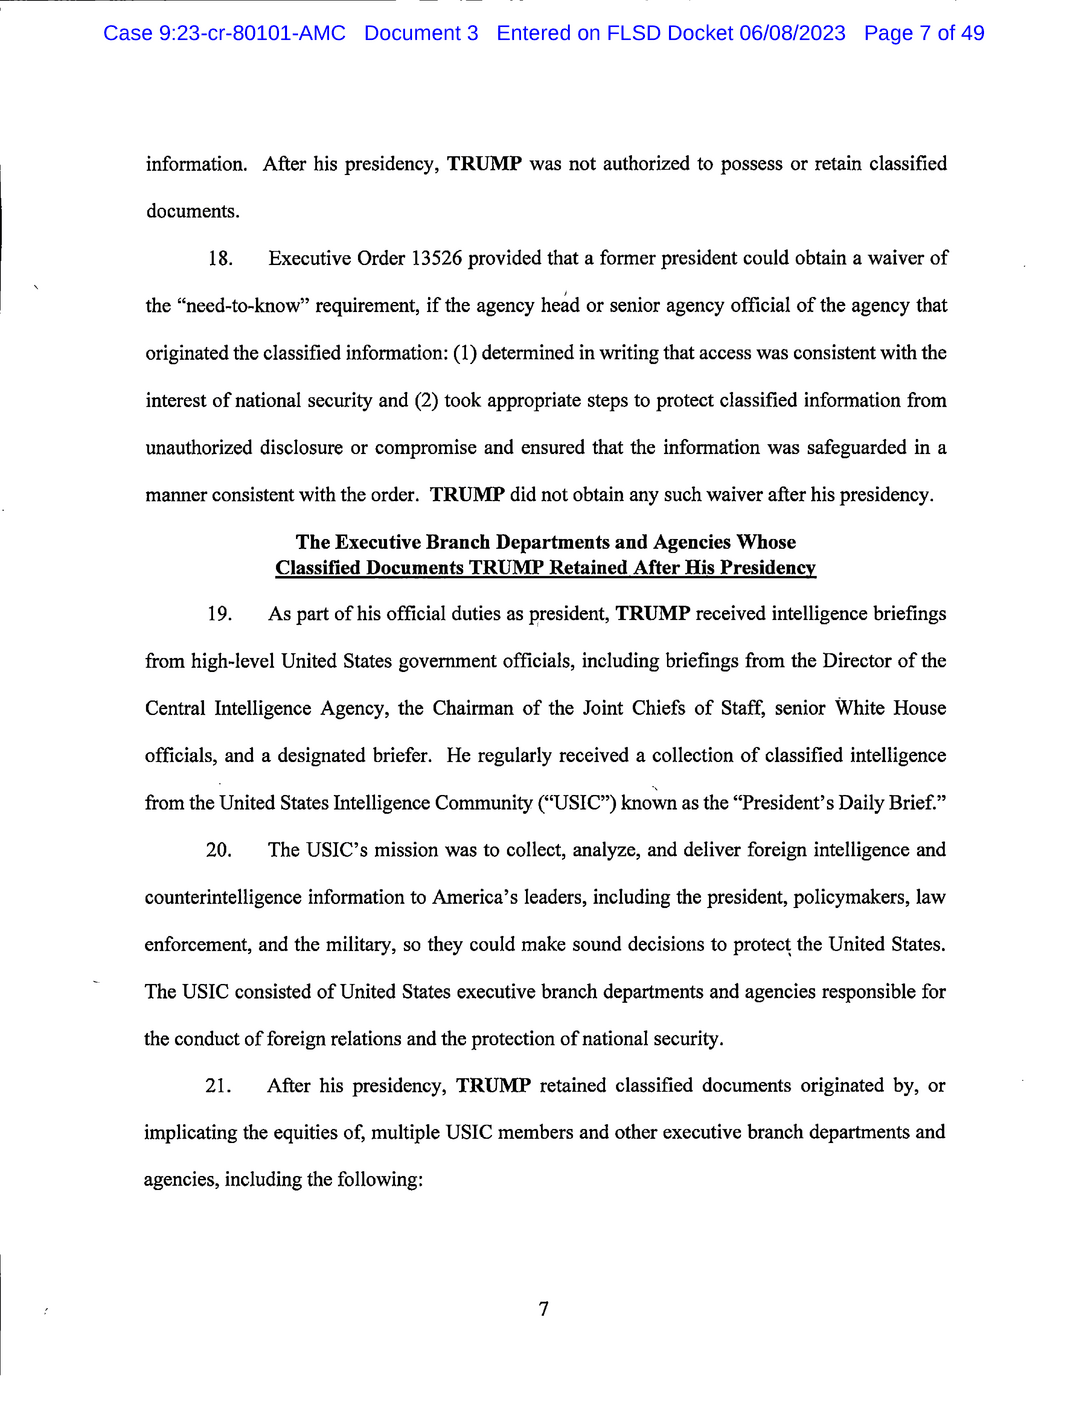 Page 7 of Donald Trump Classified Documents Indictment PDF document.